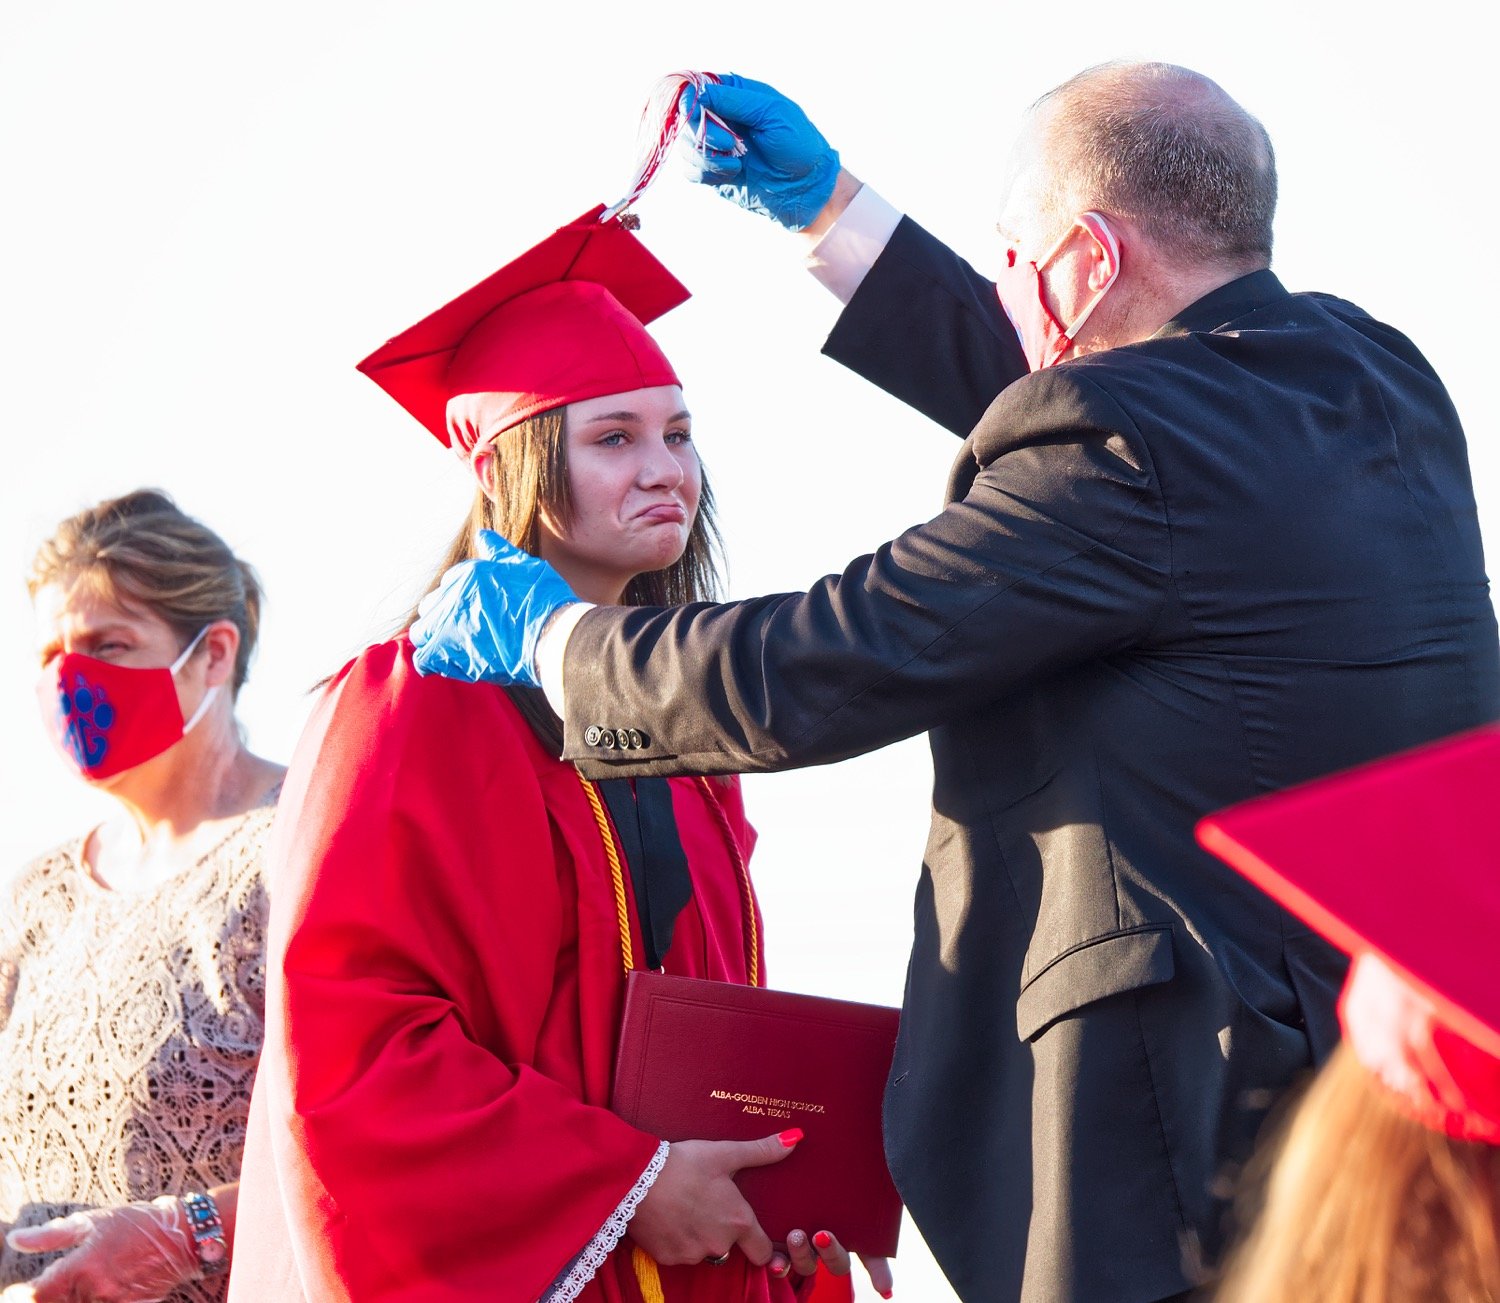 Laynie Culp seems to express mixed emotions about the occasion of her graduation as Principal Michael Mize moves her tassel of her cap.